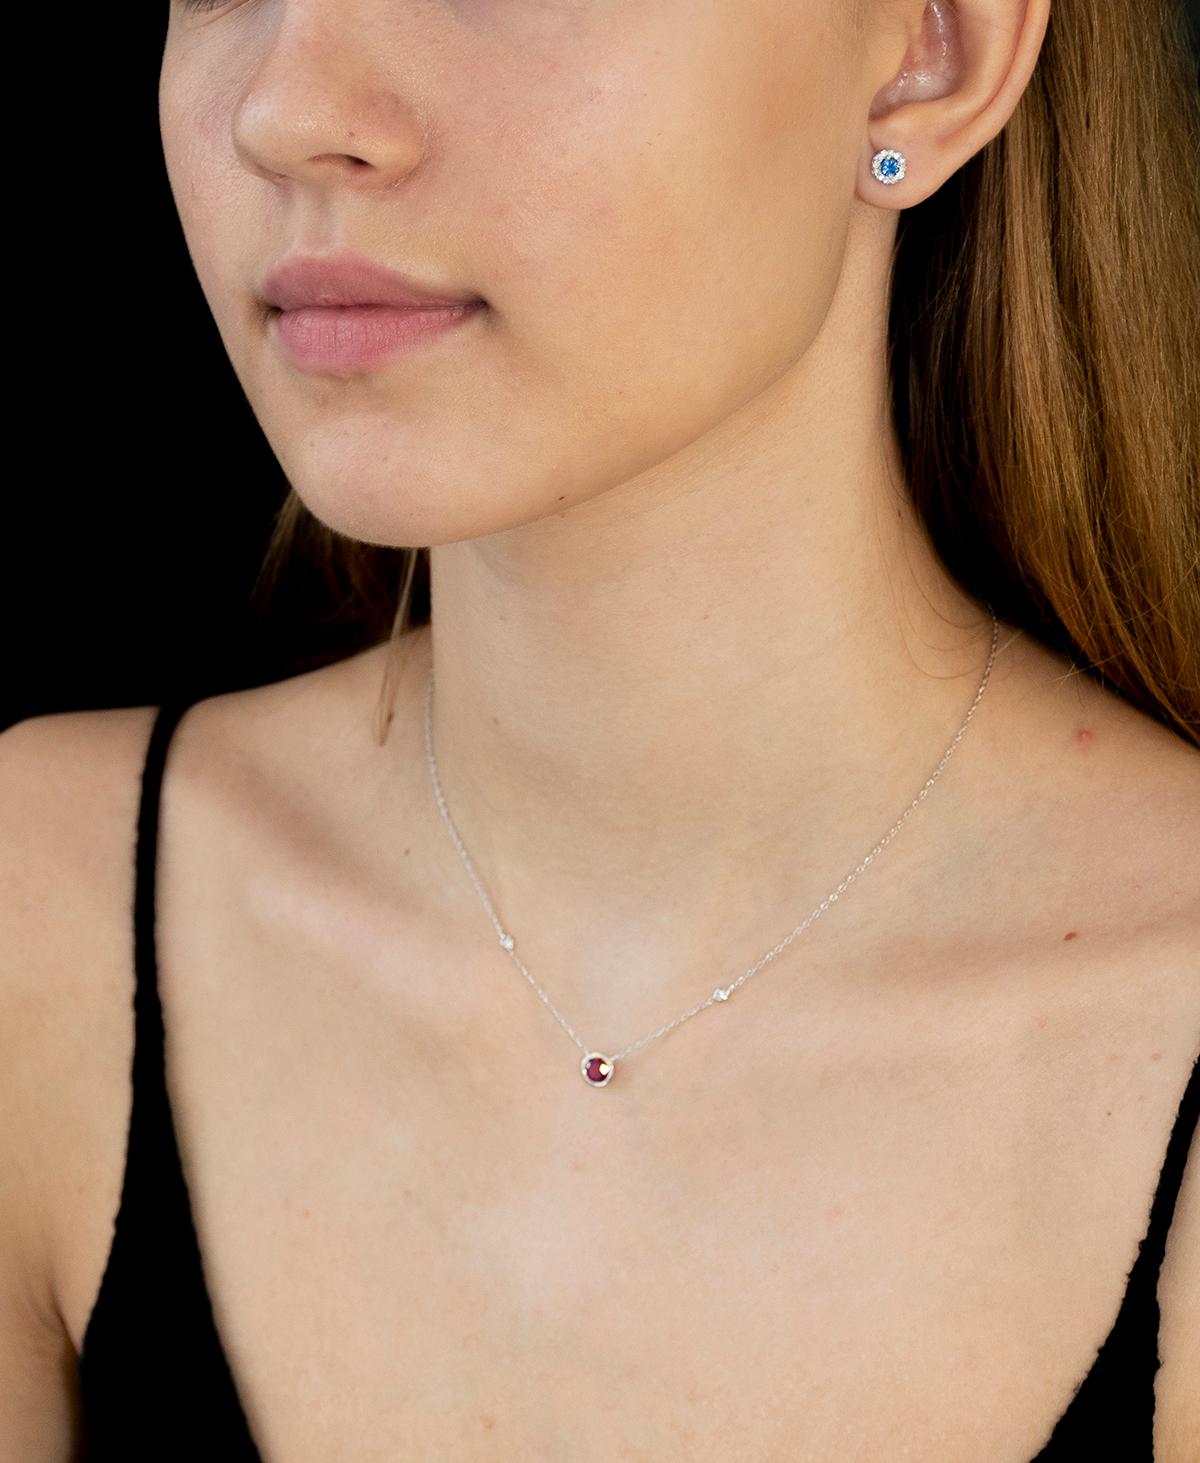 14 karat white gold necklace pendant with one ruby bezel set and two bezel-set brilliant cut diamond
Sixteen inch long
Diamond total weight 0.10 carat
Center ruby weight 0.85 carat
Thin cable chain necklace with spring lock: a lock that fastens with